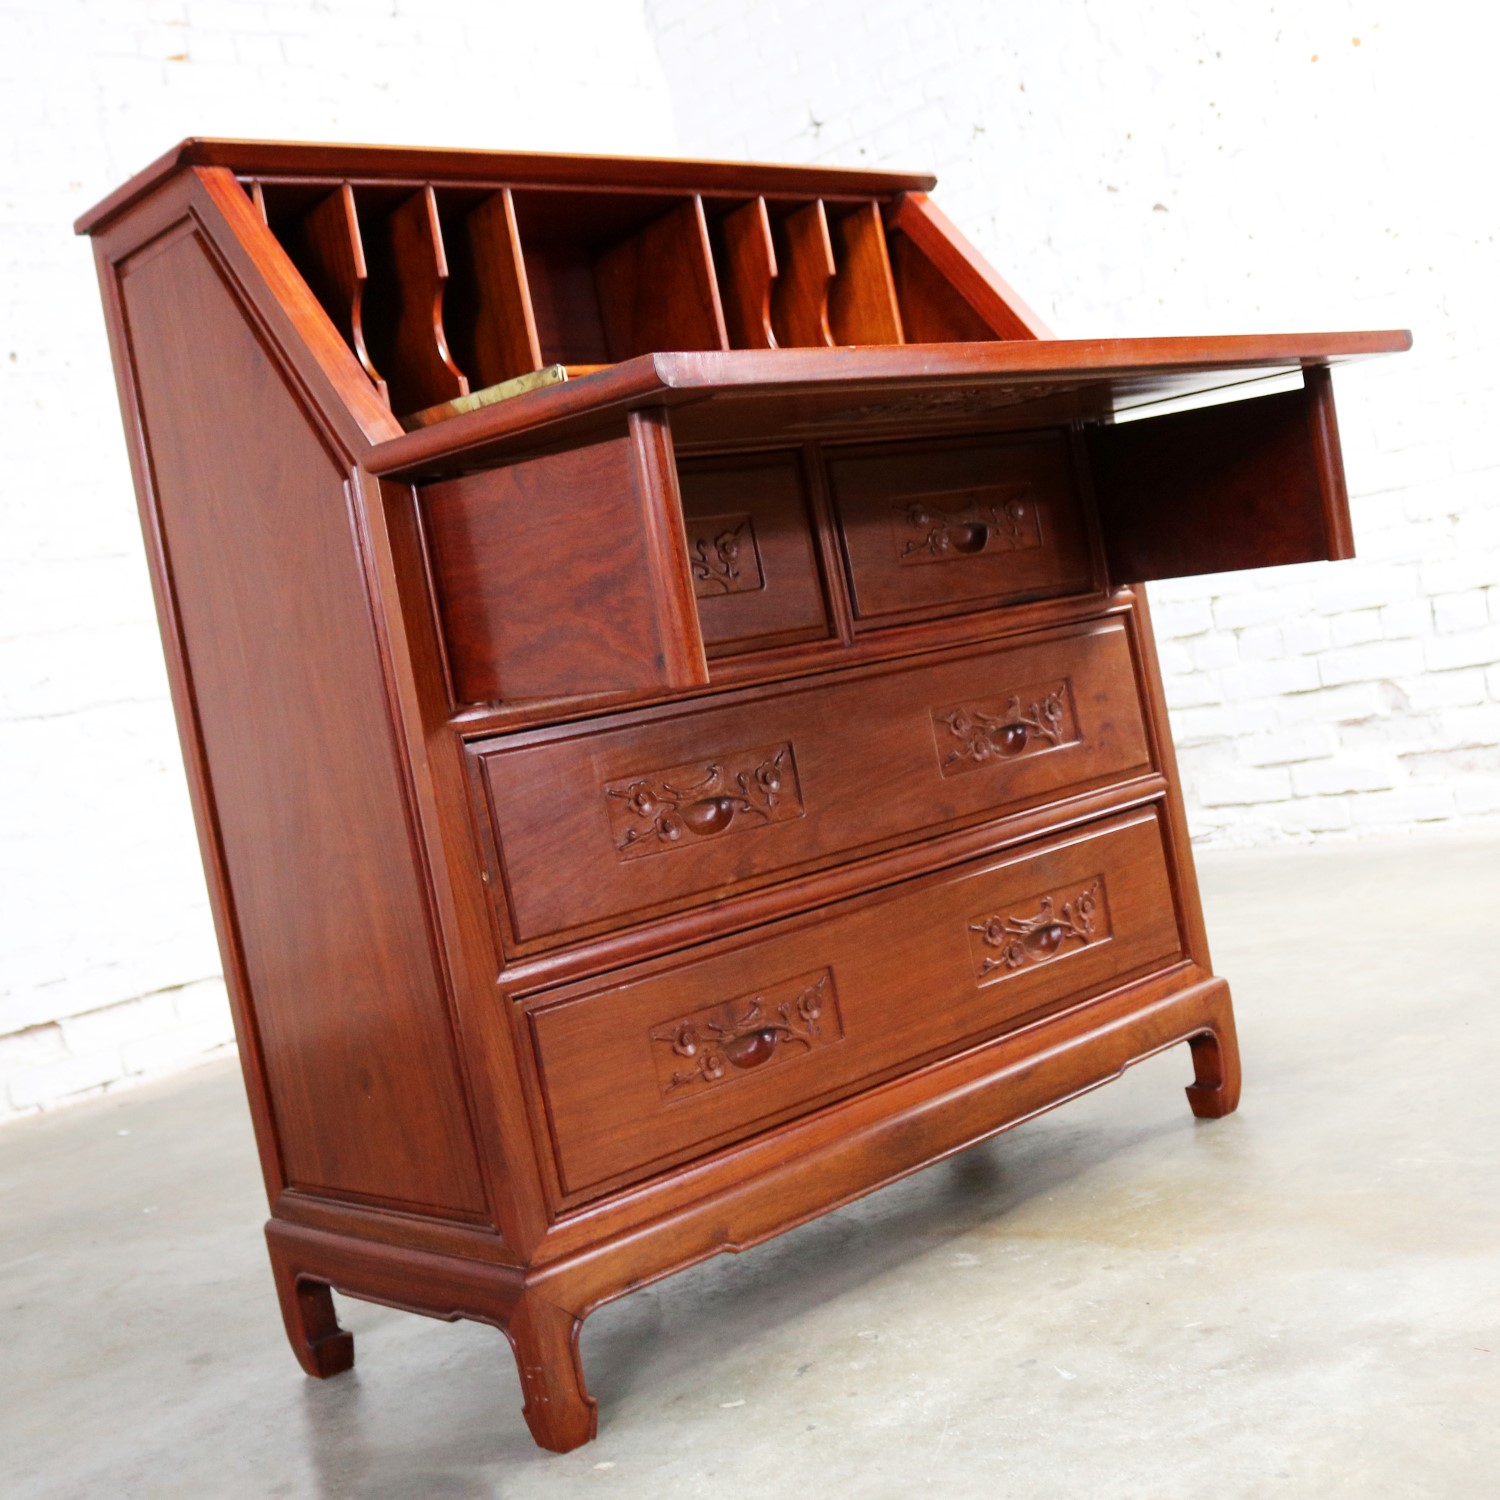 Asian Teak Hand Carved Drop Front Compartmentalized Desk Style of George Zee